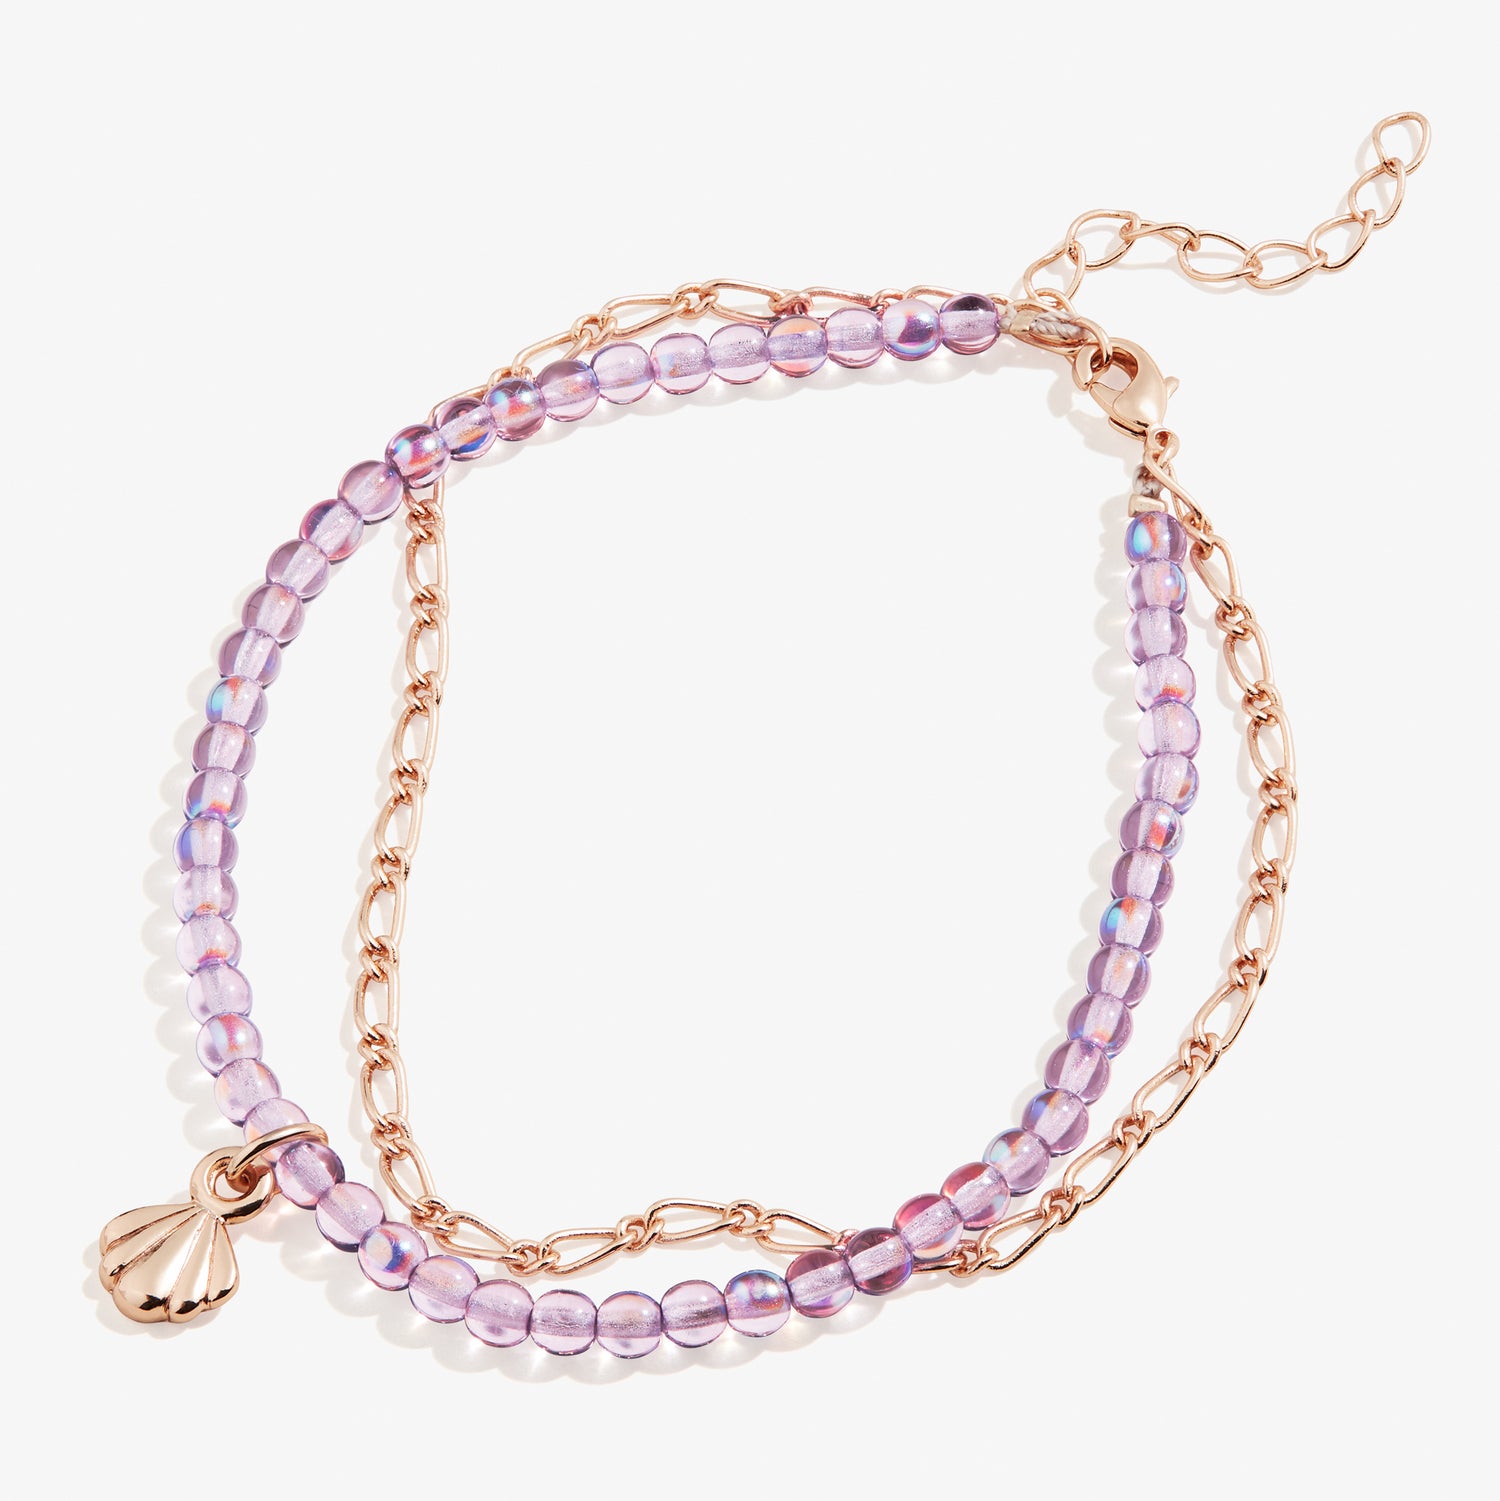 Seashell Bead and Chain Anklet